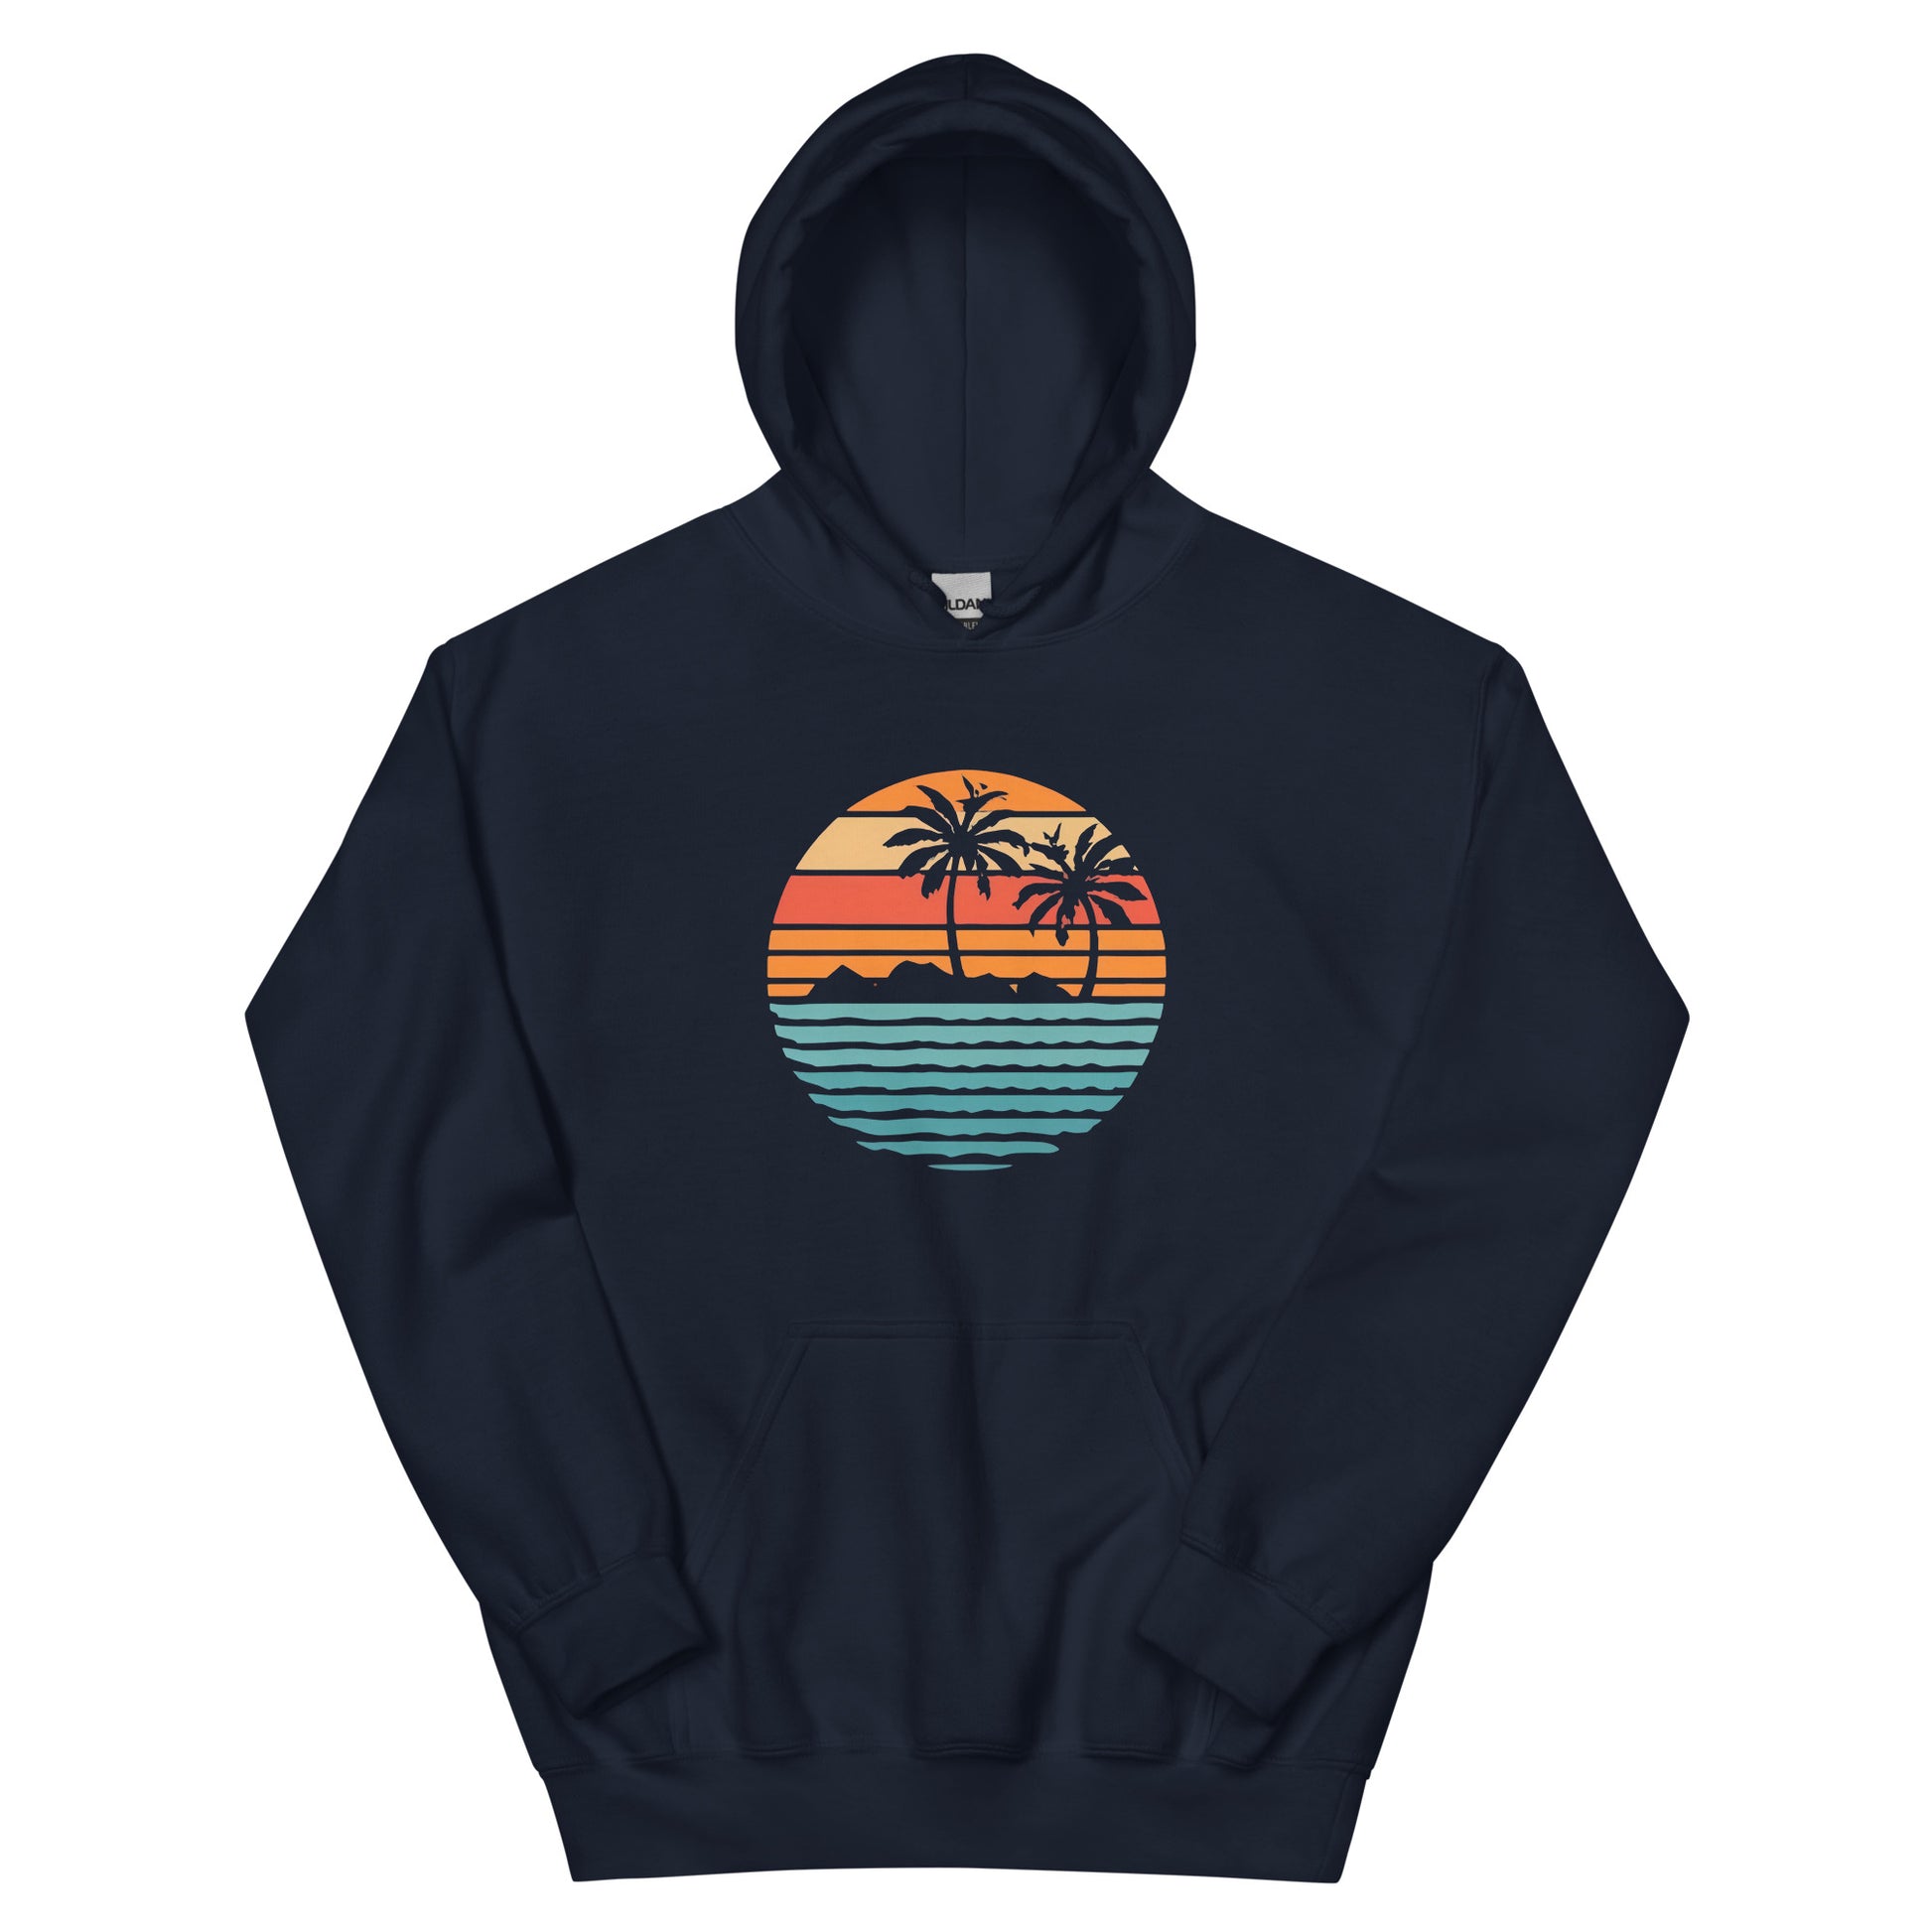 Navy Hoodie and a print of retro island